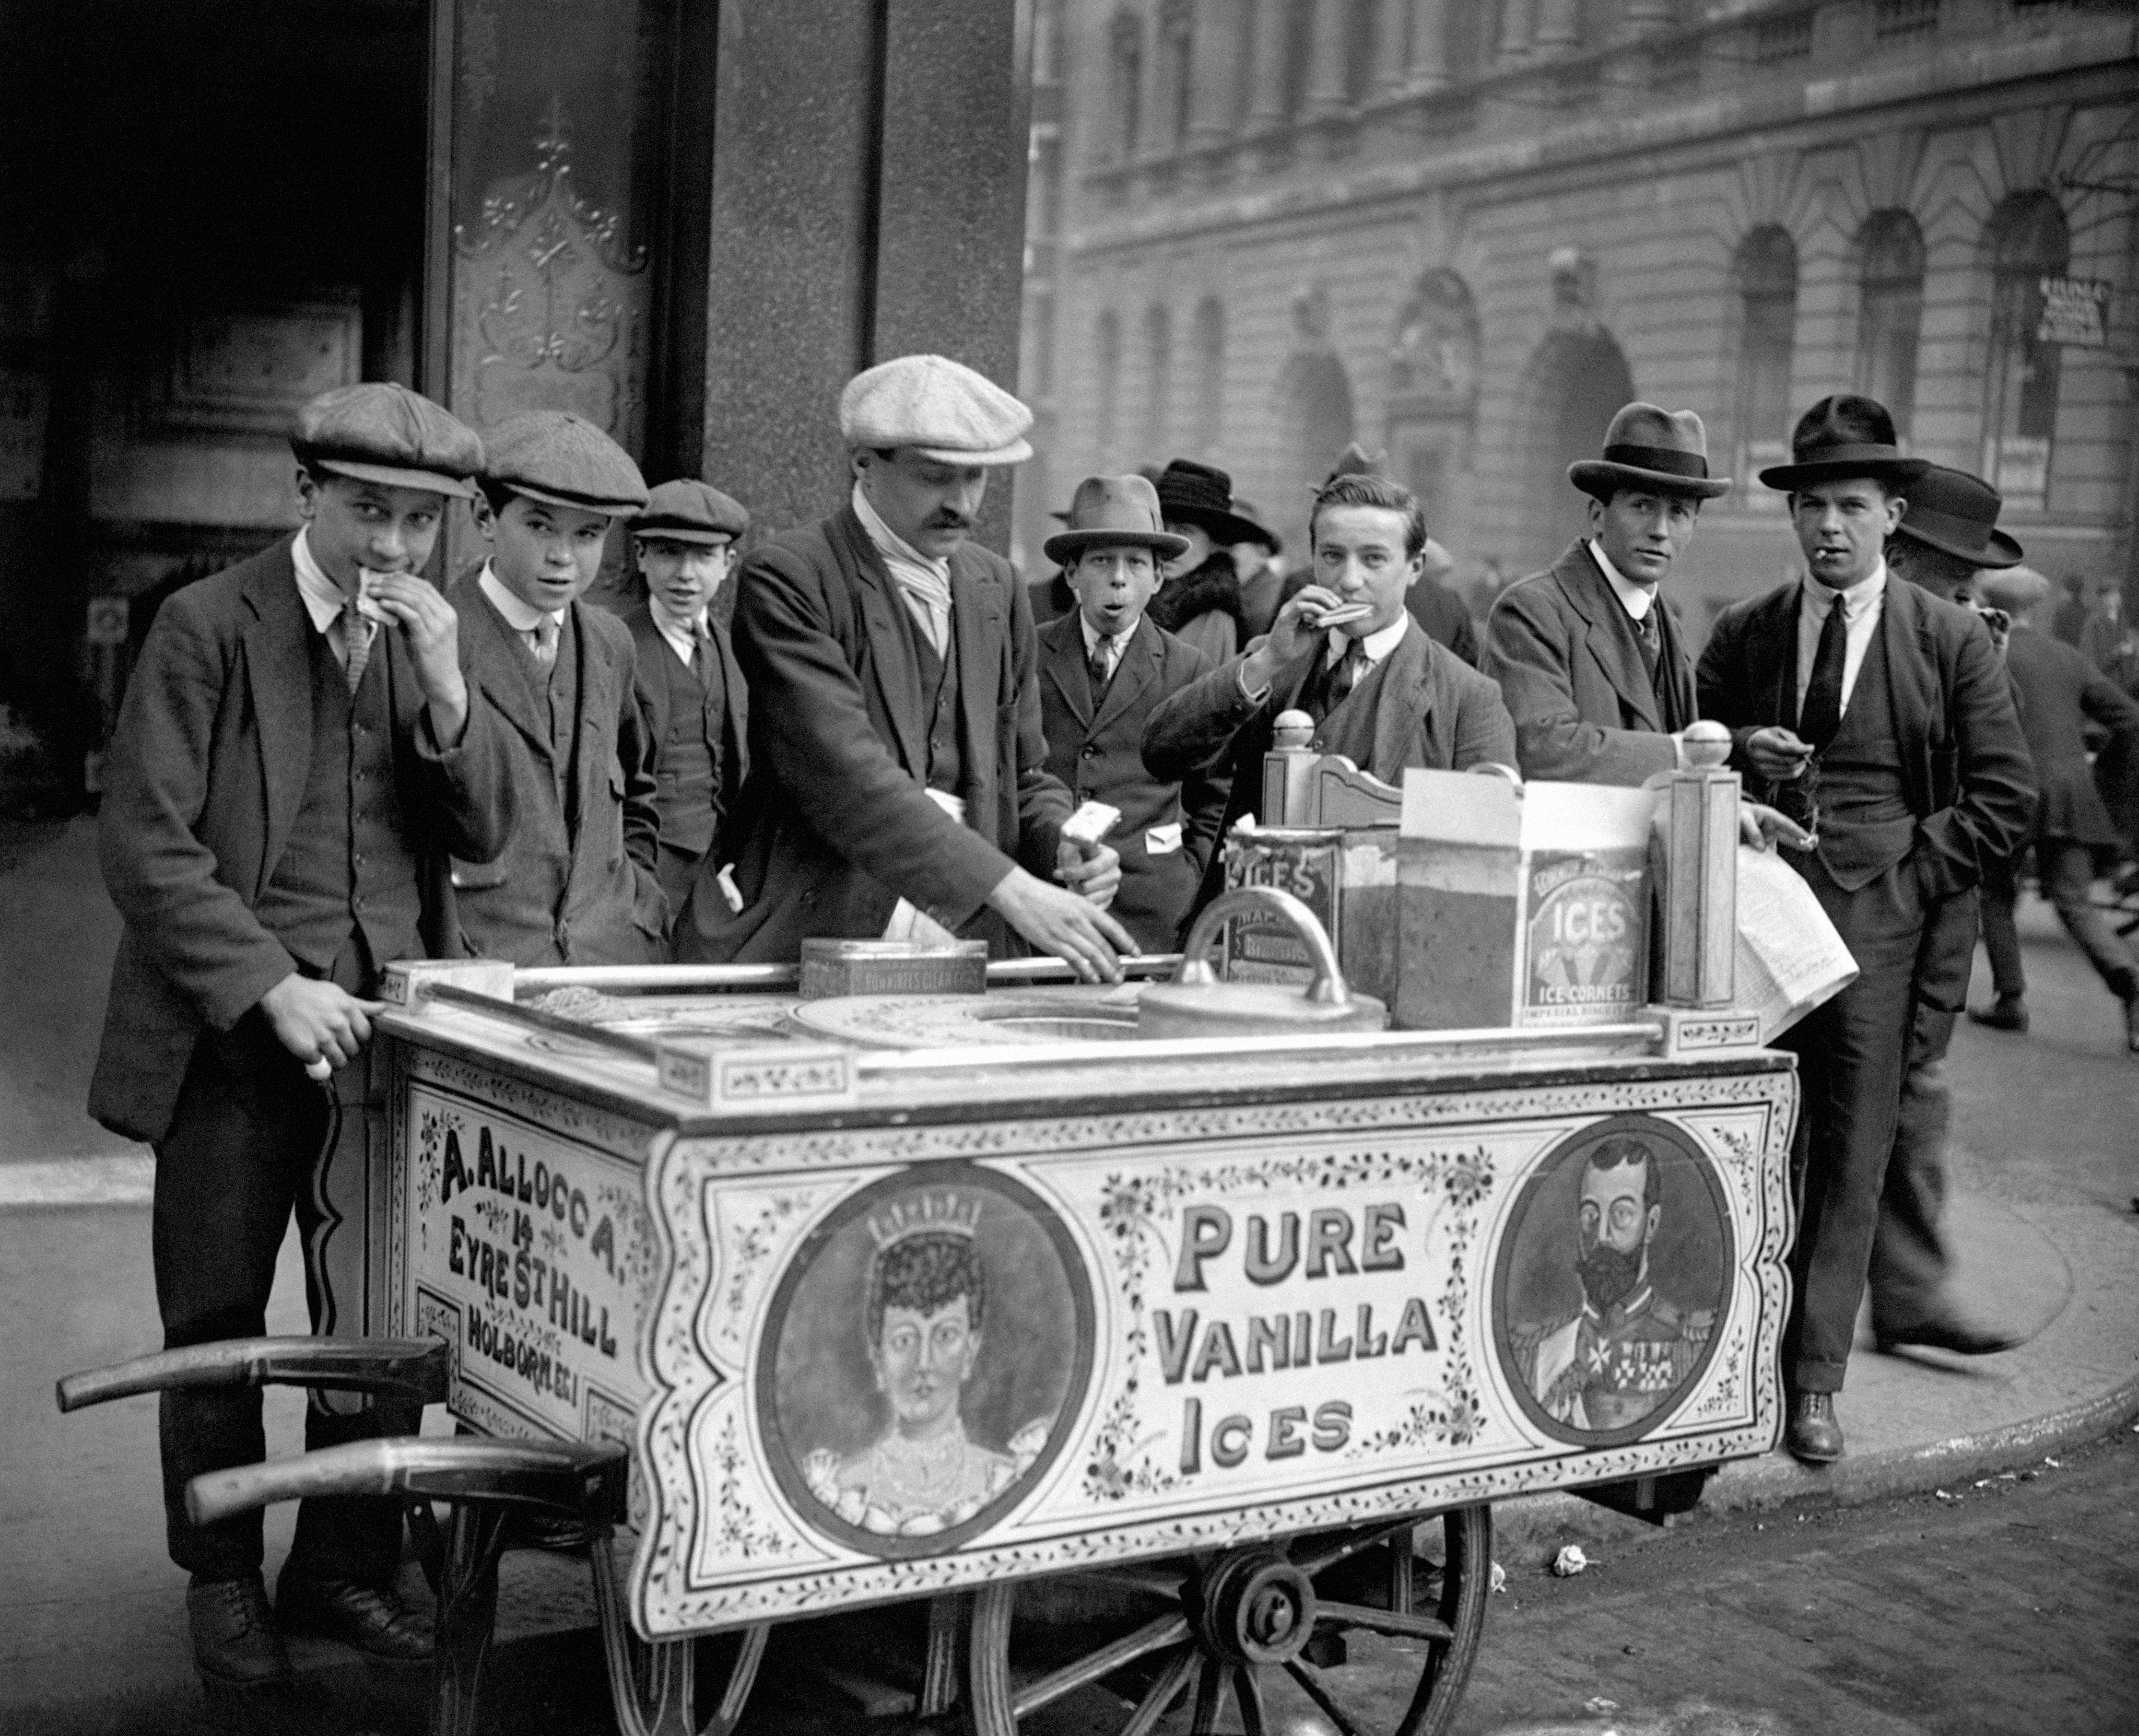 An Italian ice cream seller, Mr Allocca, and his patriotically decorated ice cream cart which displays images of King George V and Queen Mary, selling ice creams on the streets of London in 1921 (PA Archive)